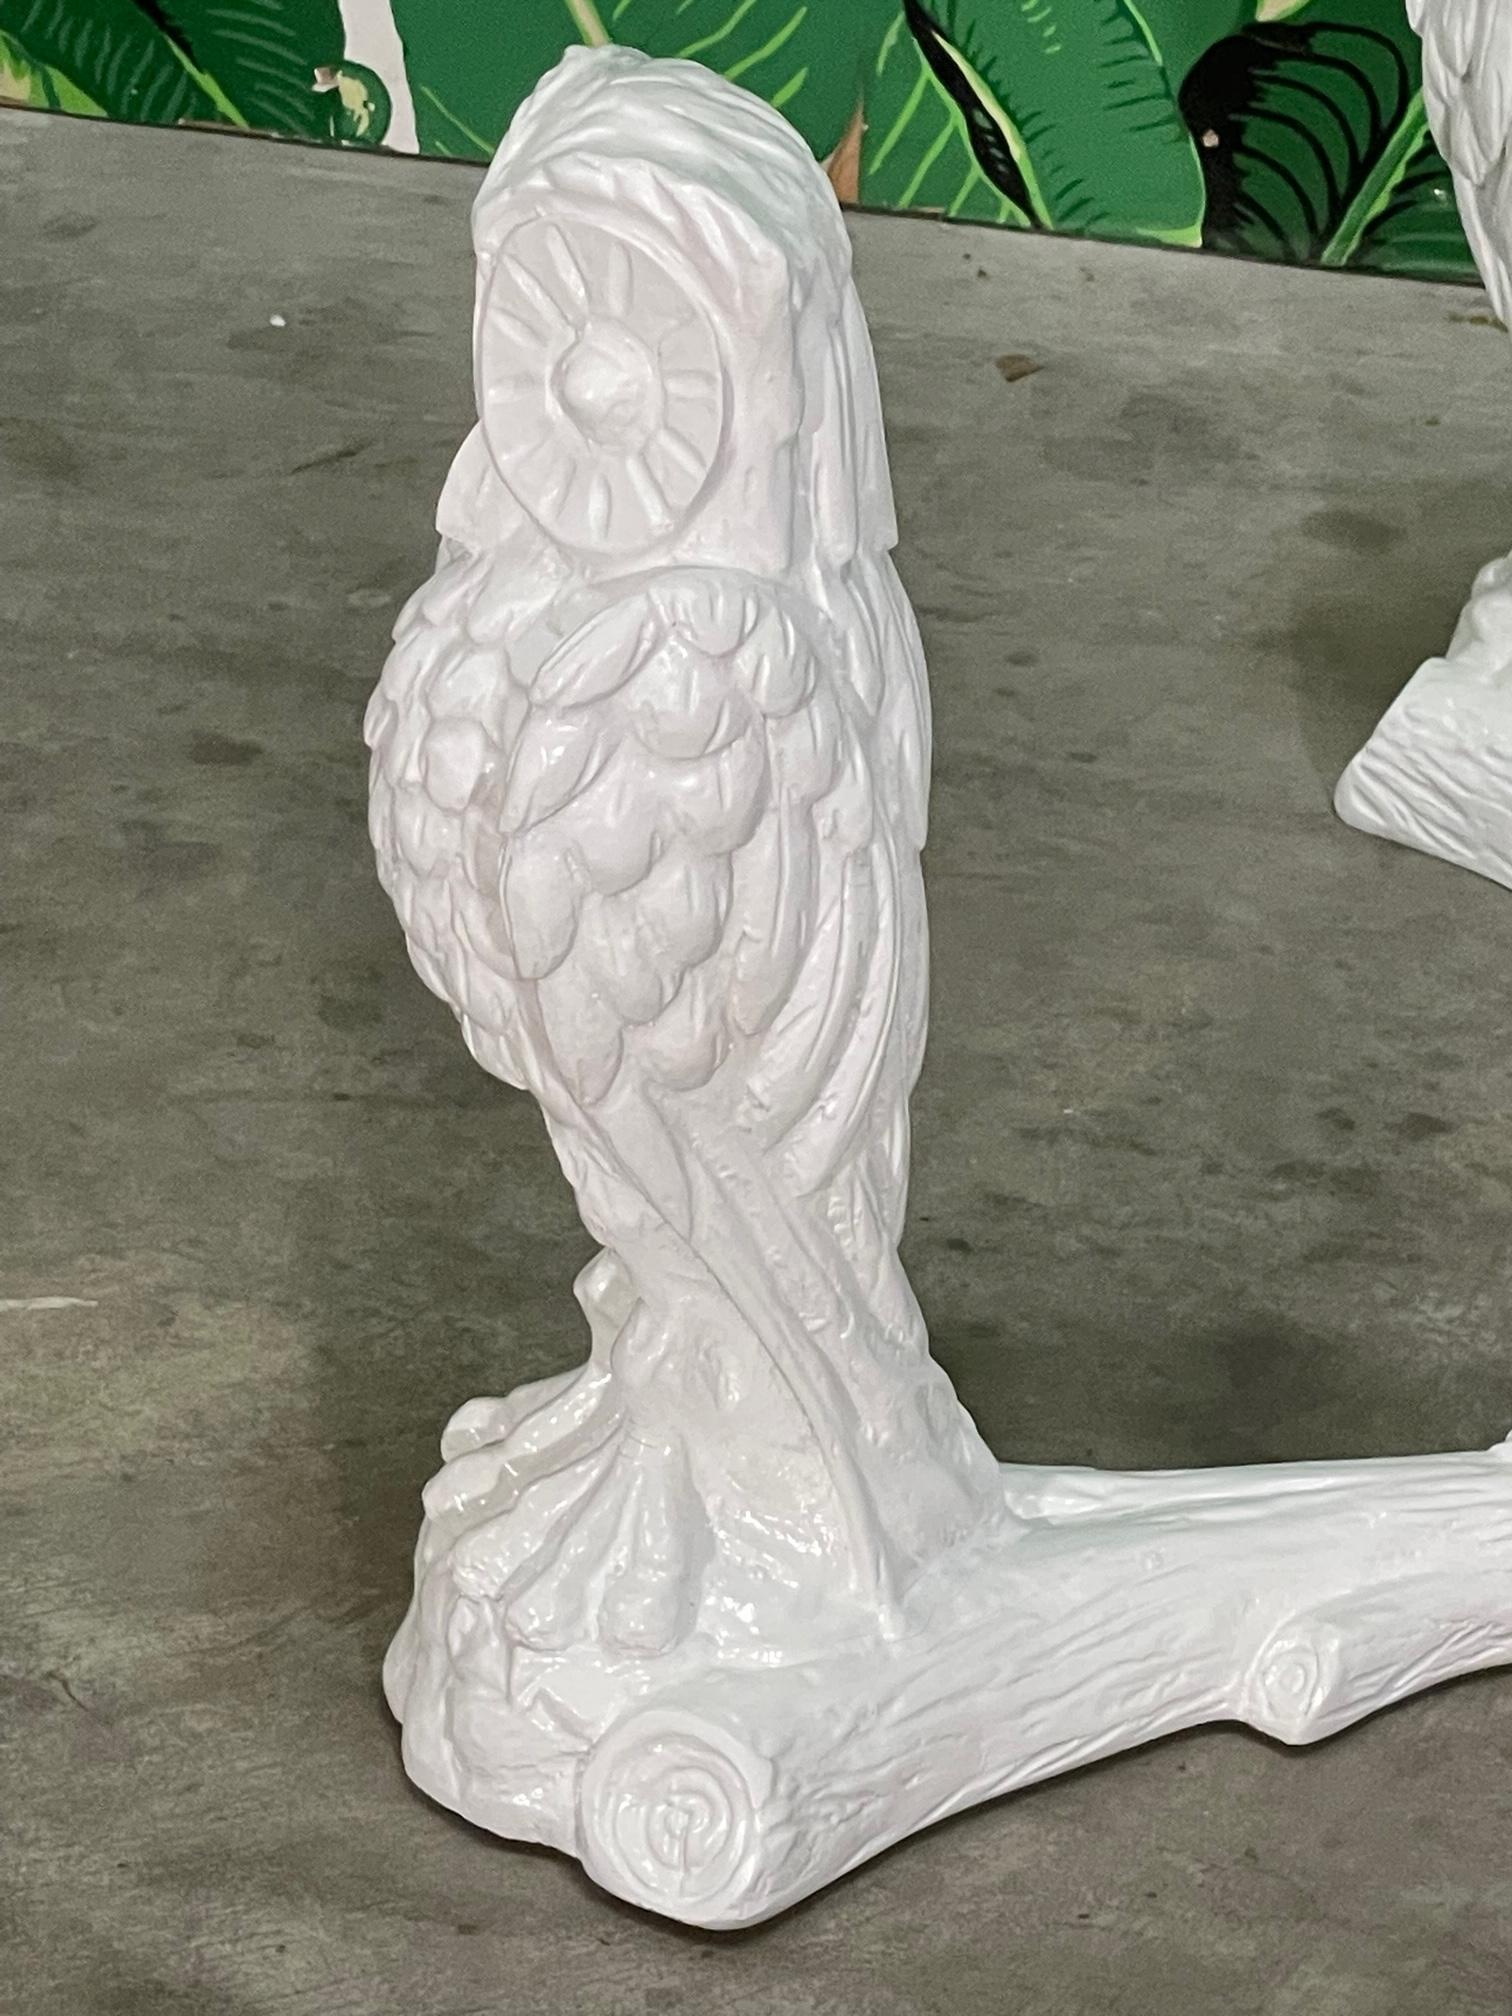 Gampel Stoll Sculptural Owl Coffee Table Base In Good Condition For Sale In Jacksonville, FL